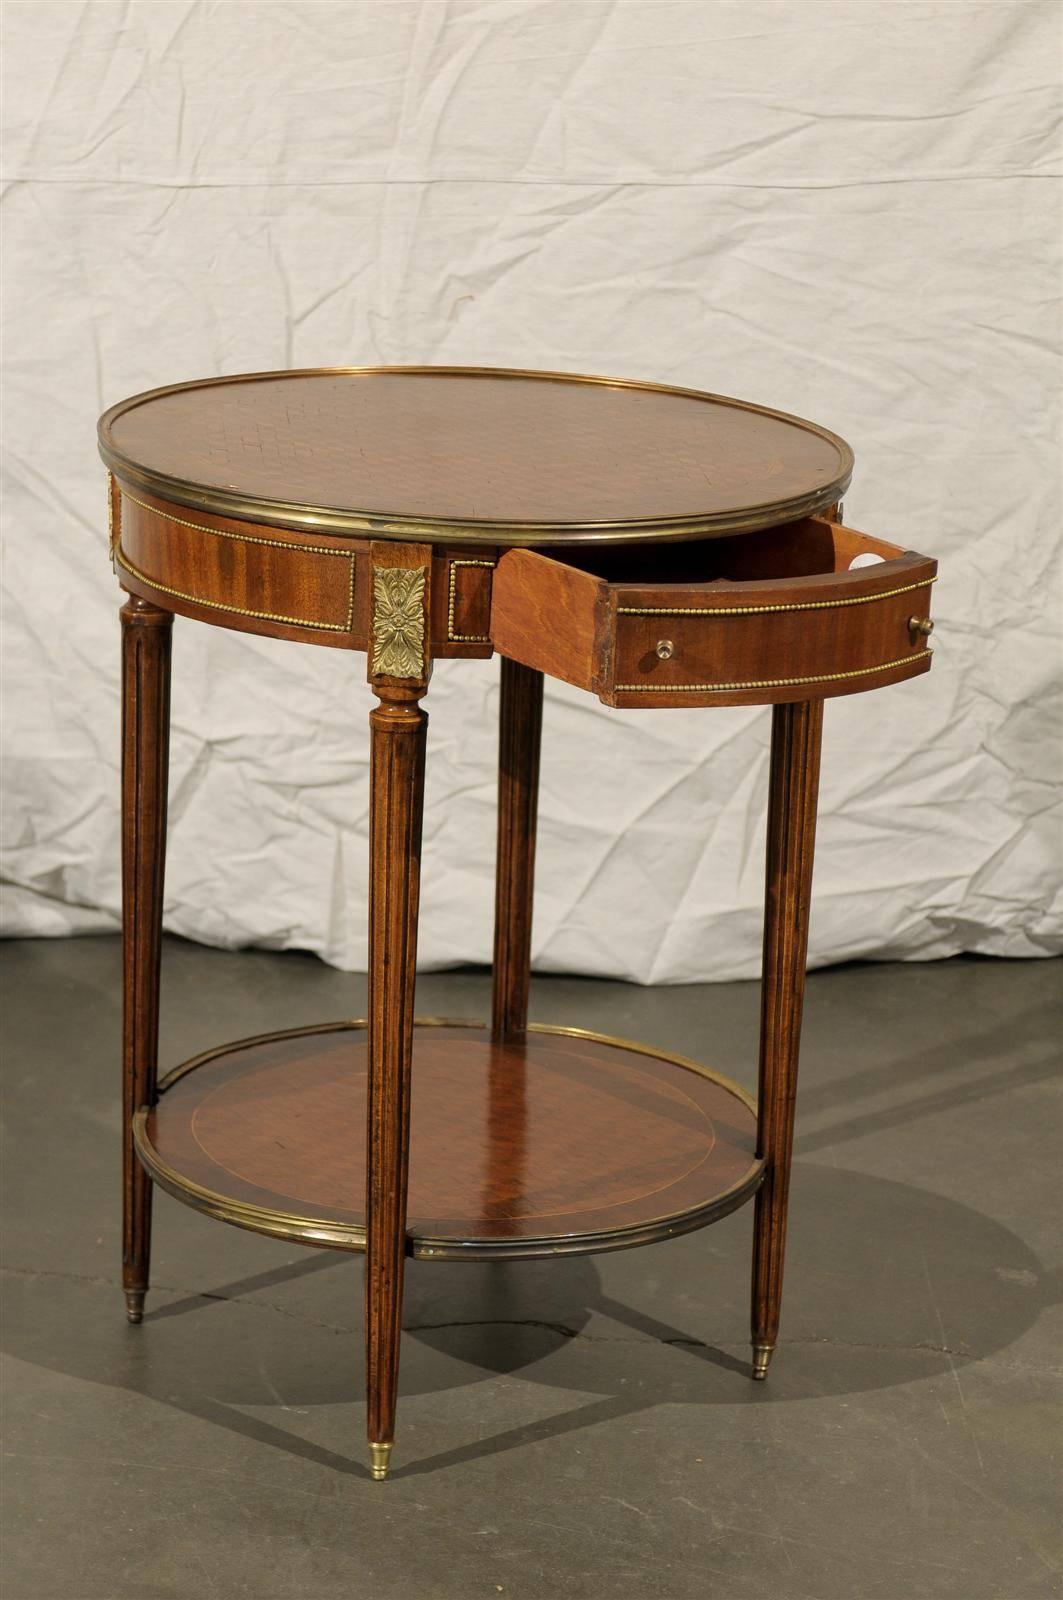 Early 20th Century French Bronze-Mounted Inlaid Bouilotte Table 1